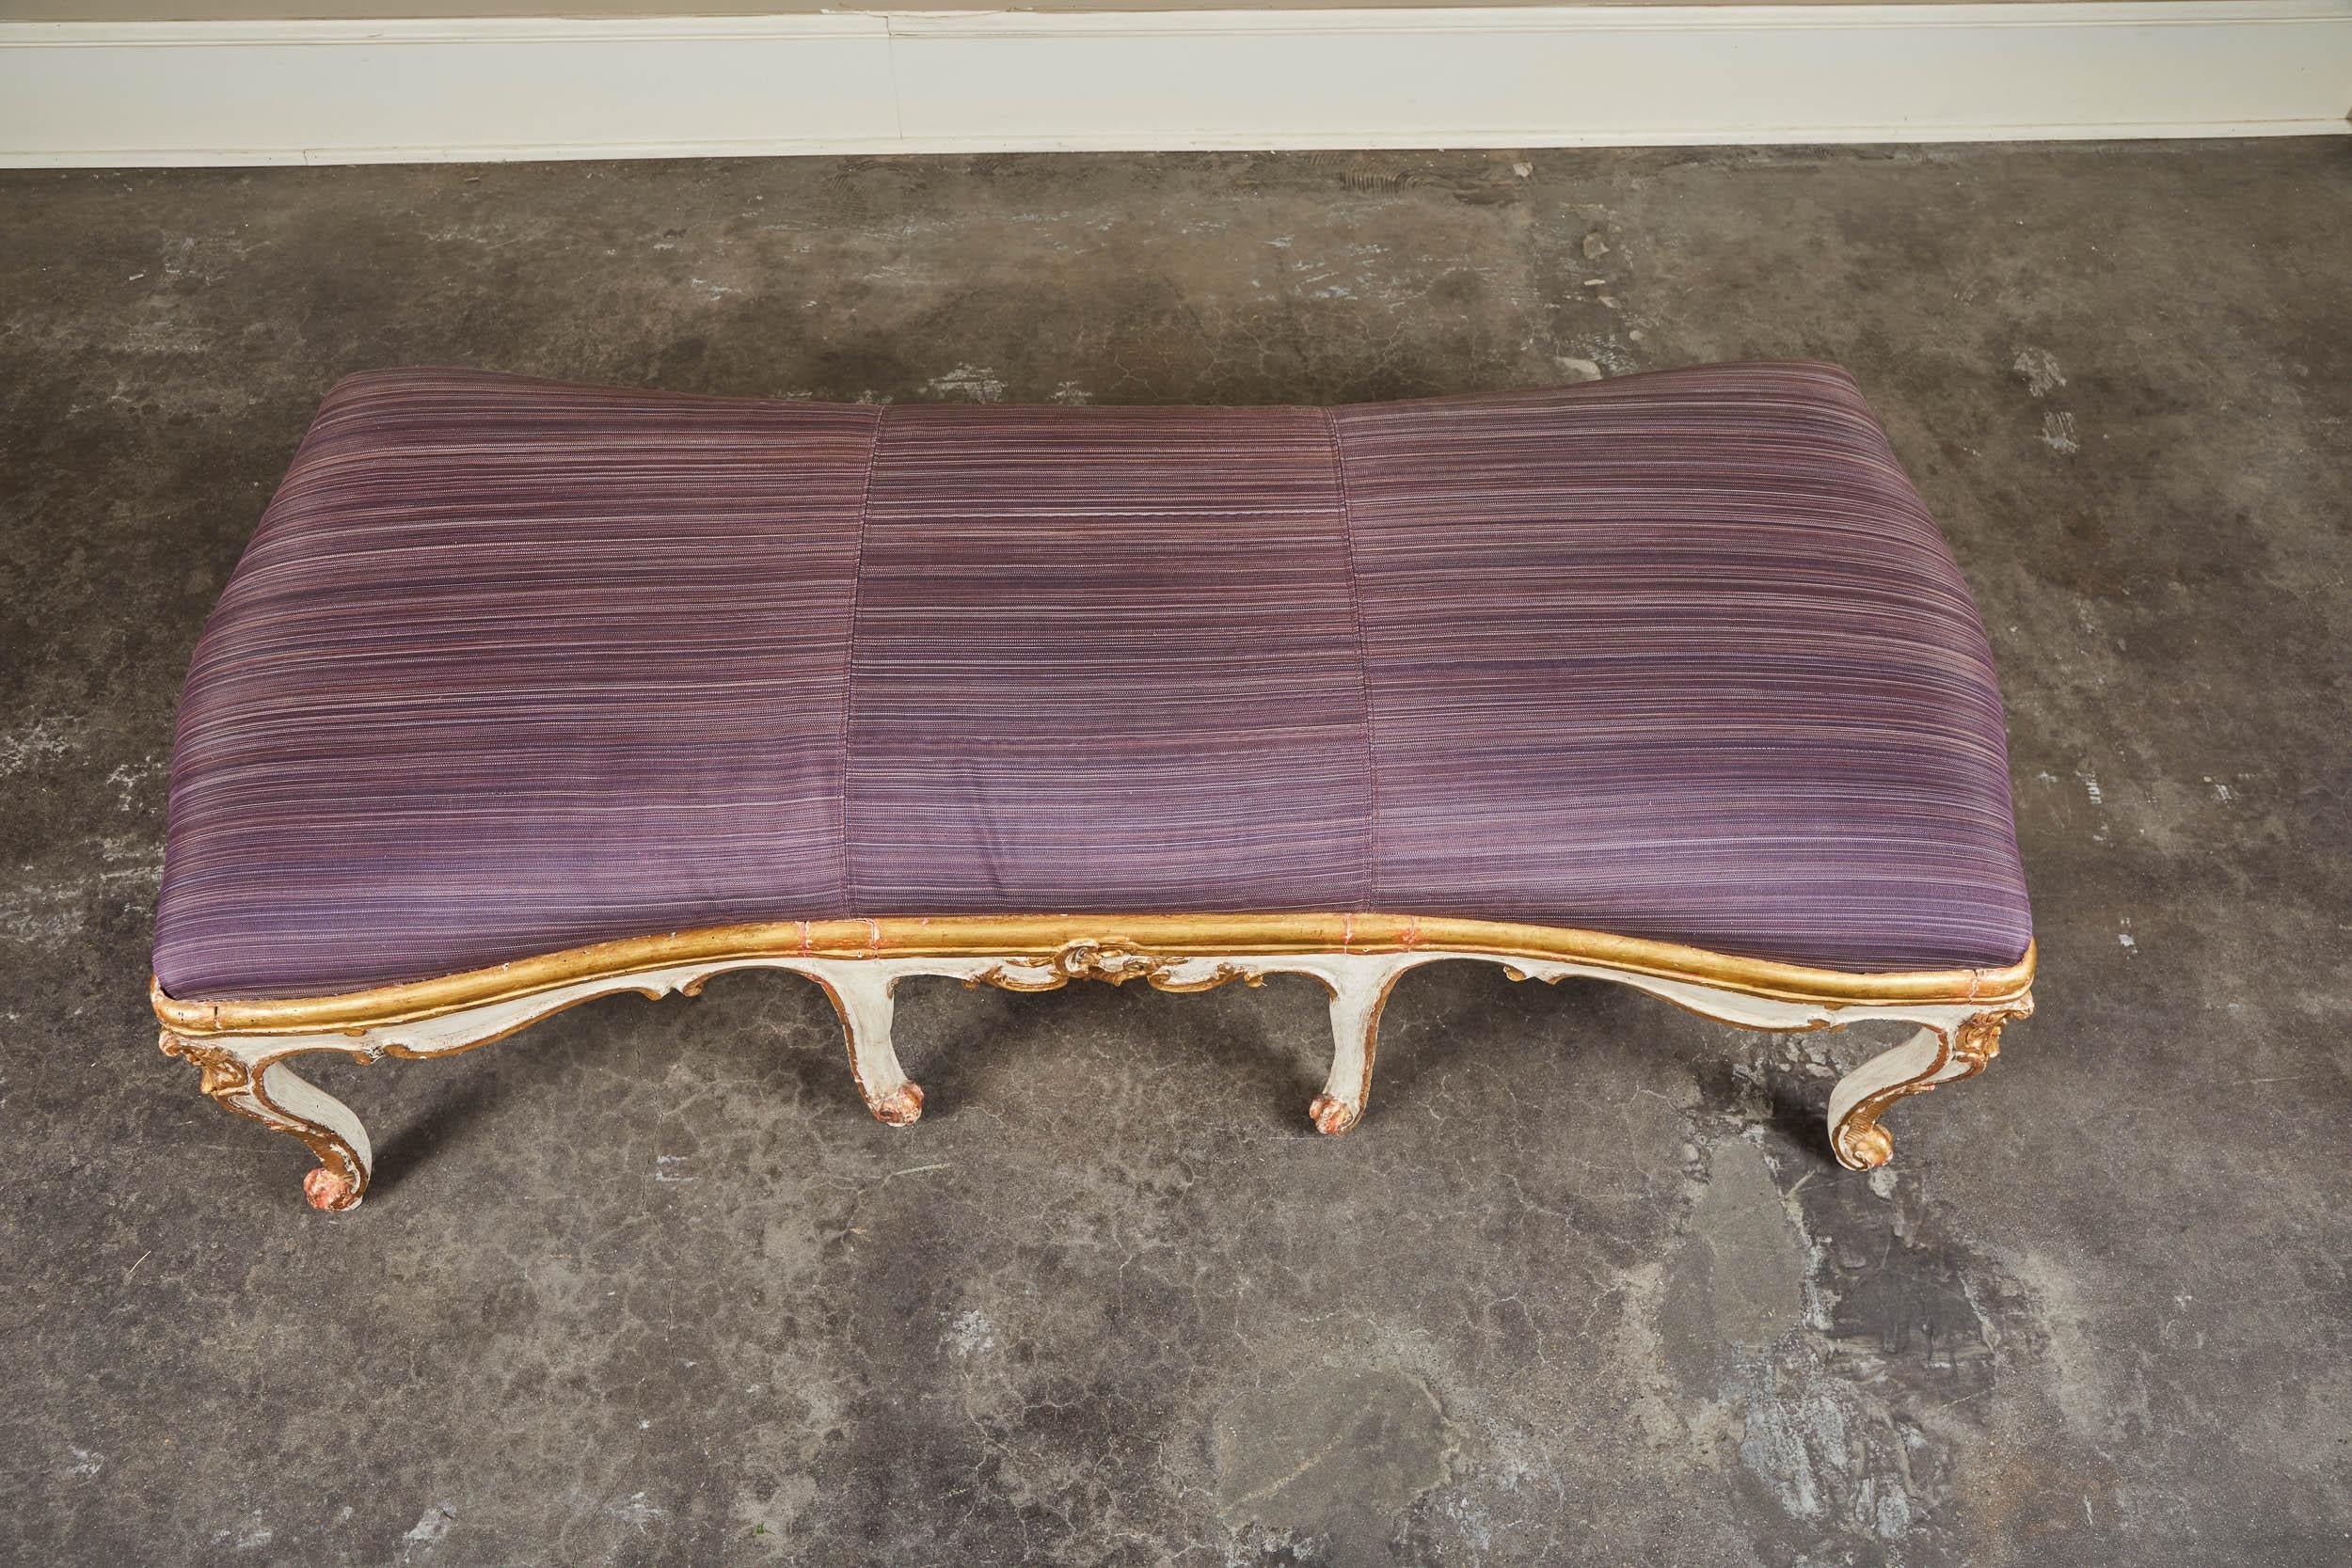 Italian Rococo style bench composed of two 18th century armchairs as base. 23.25” at narrowest bench cushion. Purple horsehair upholstery across entire cushion.